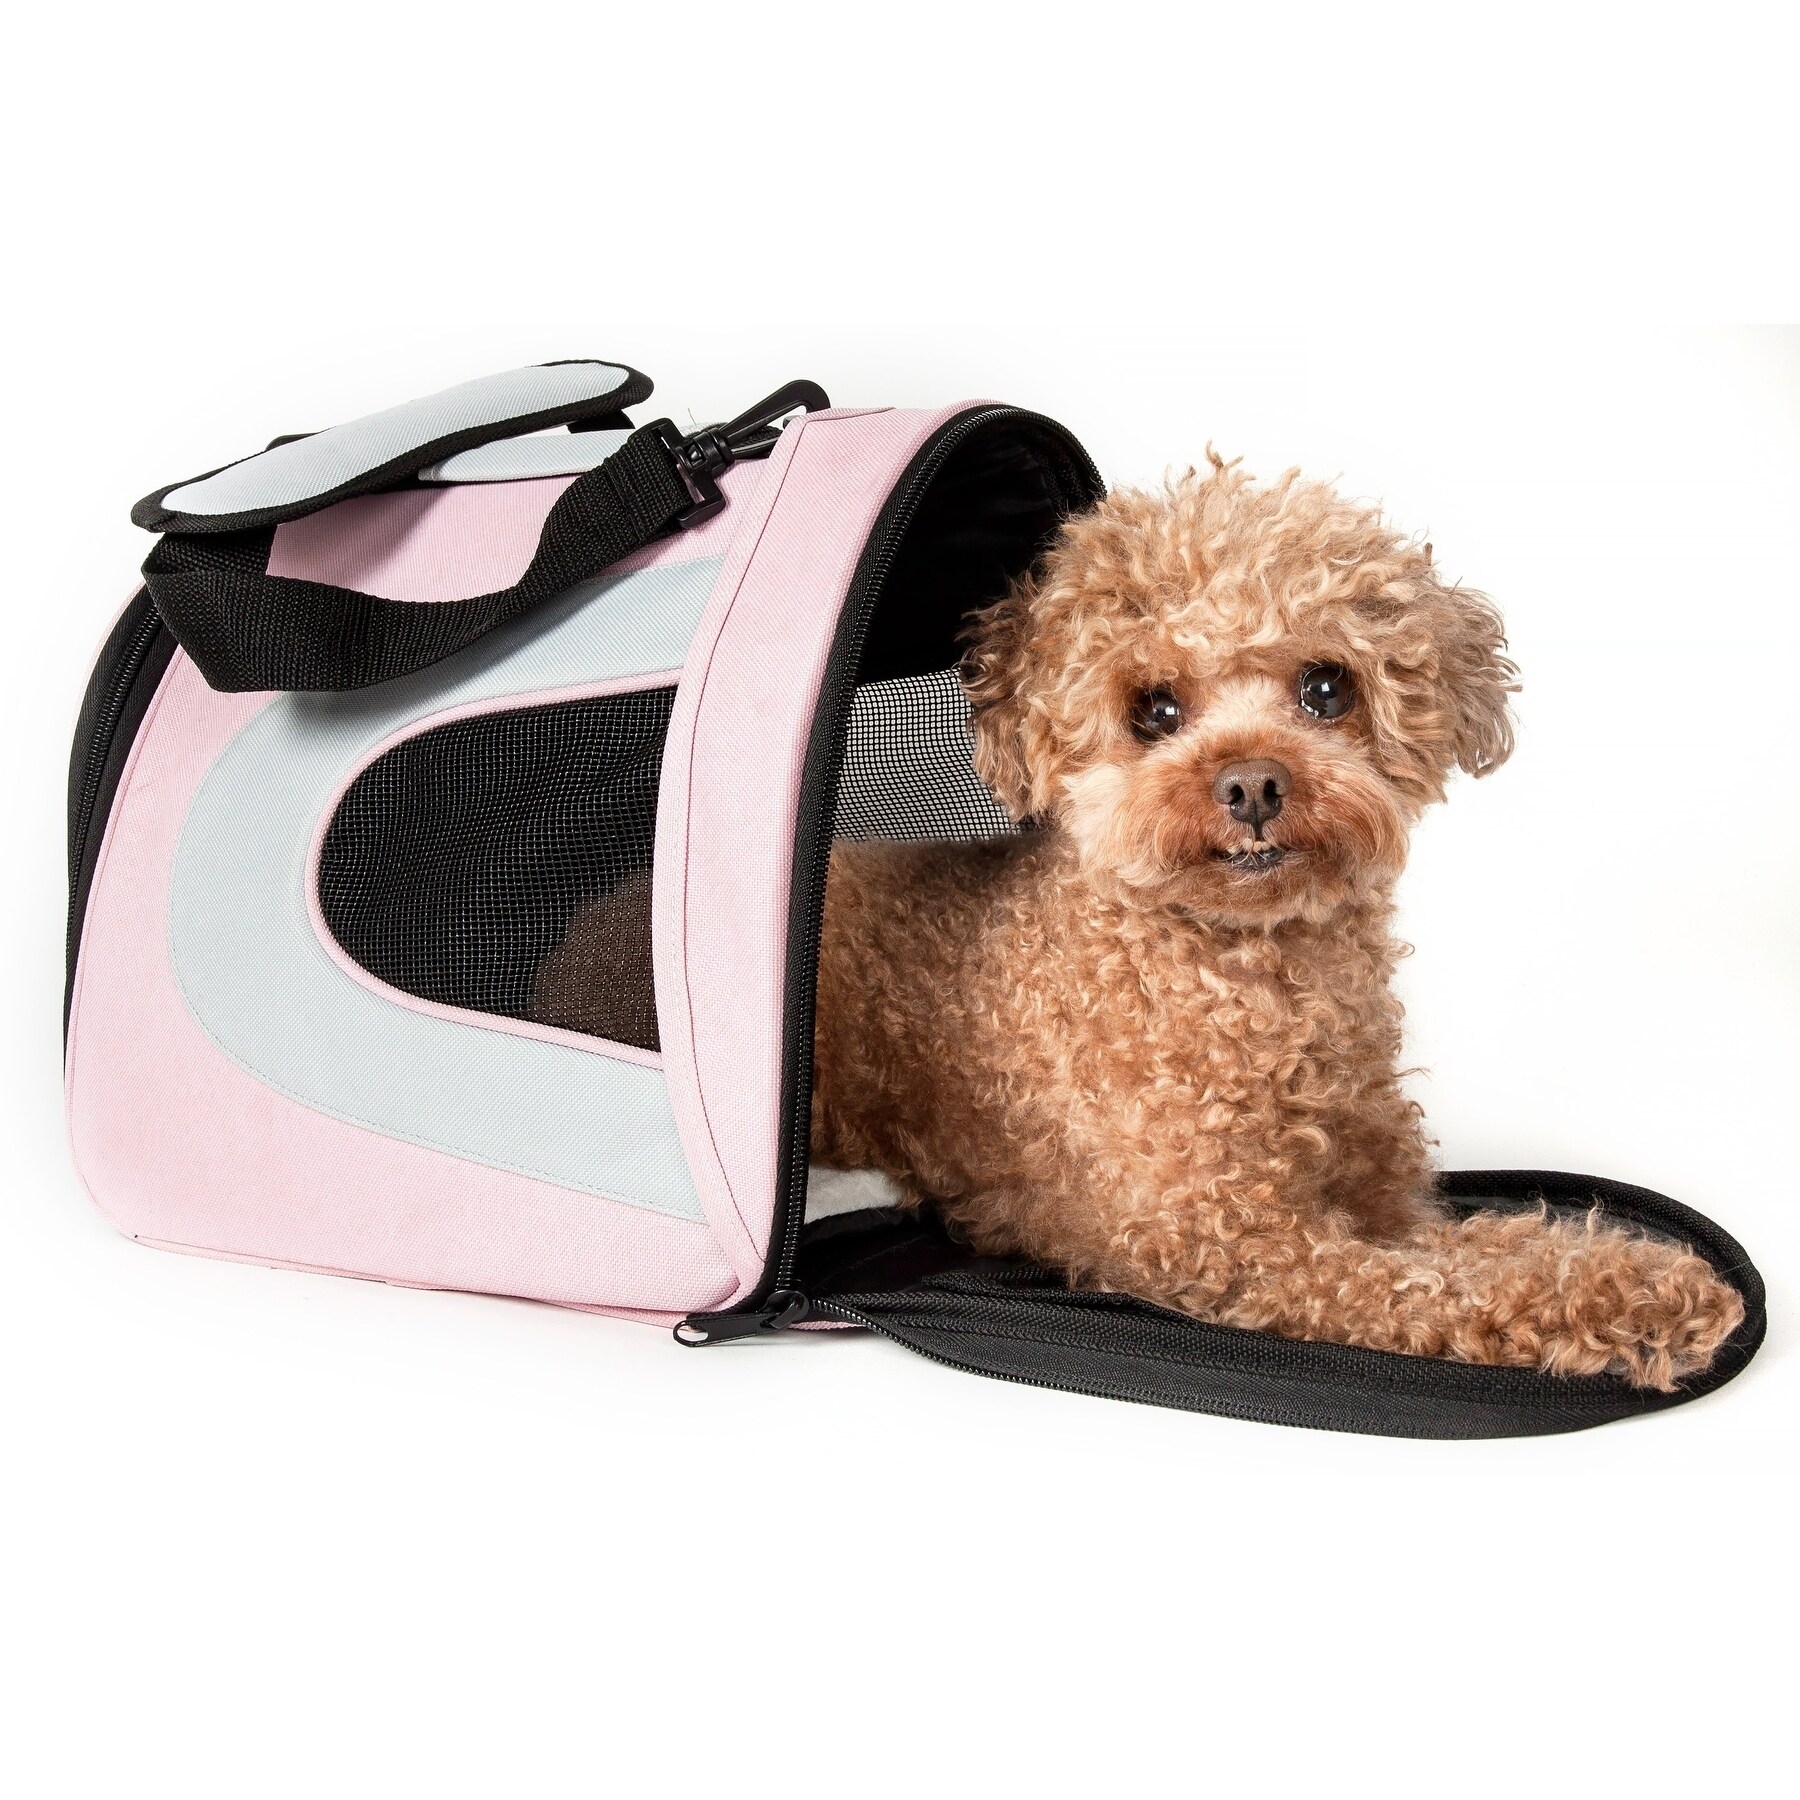 large airline pet carrier